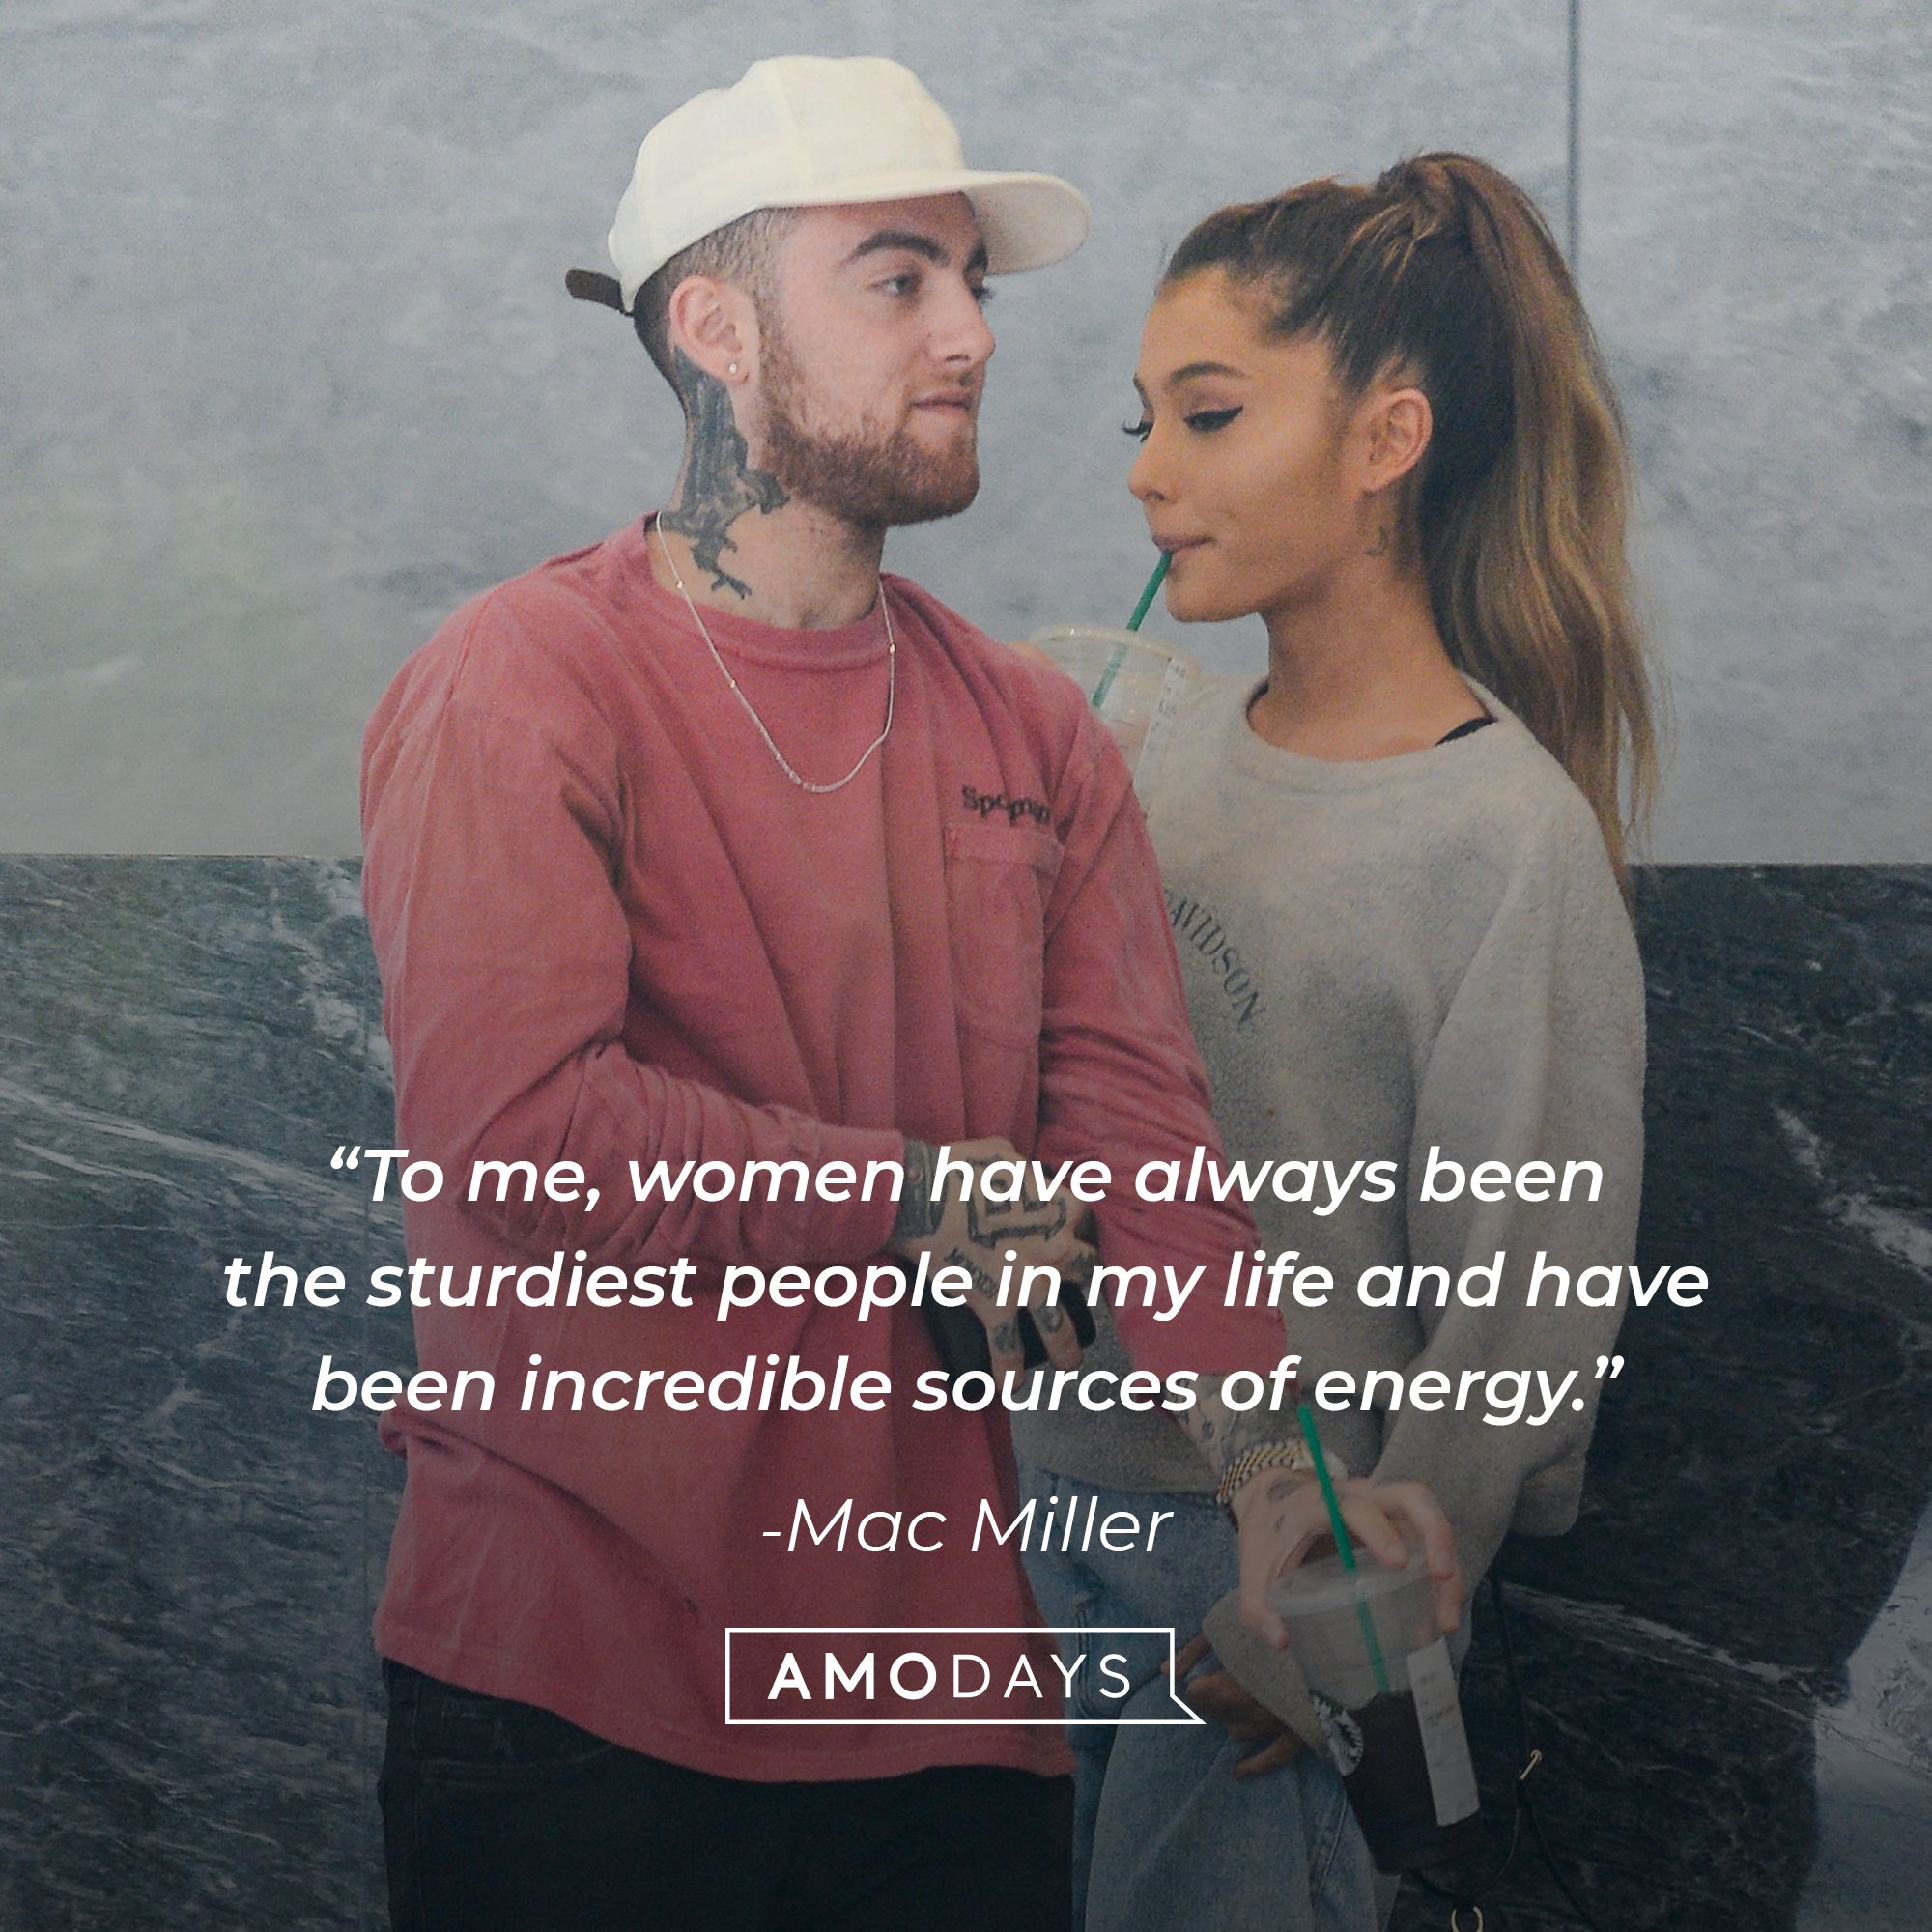  Mac Miller‘s quote: “To me, women have always been the sturdiest people in my life and have been incredible sources of energy.” │Image: AmoDays